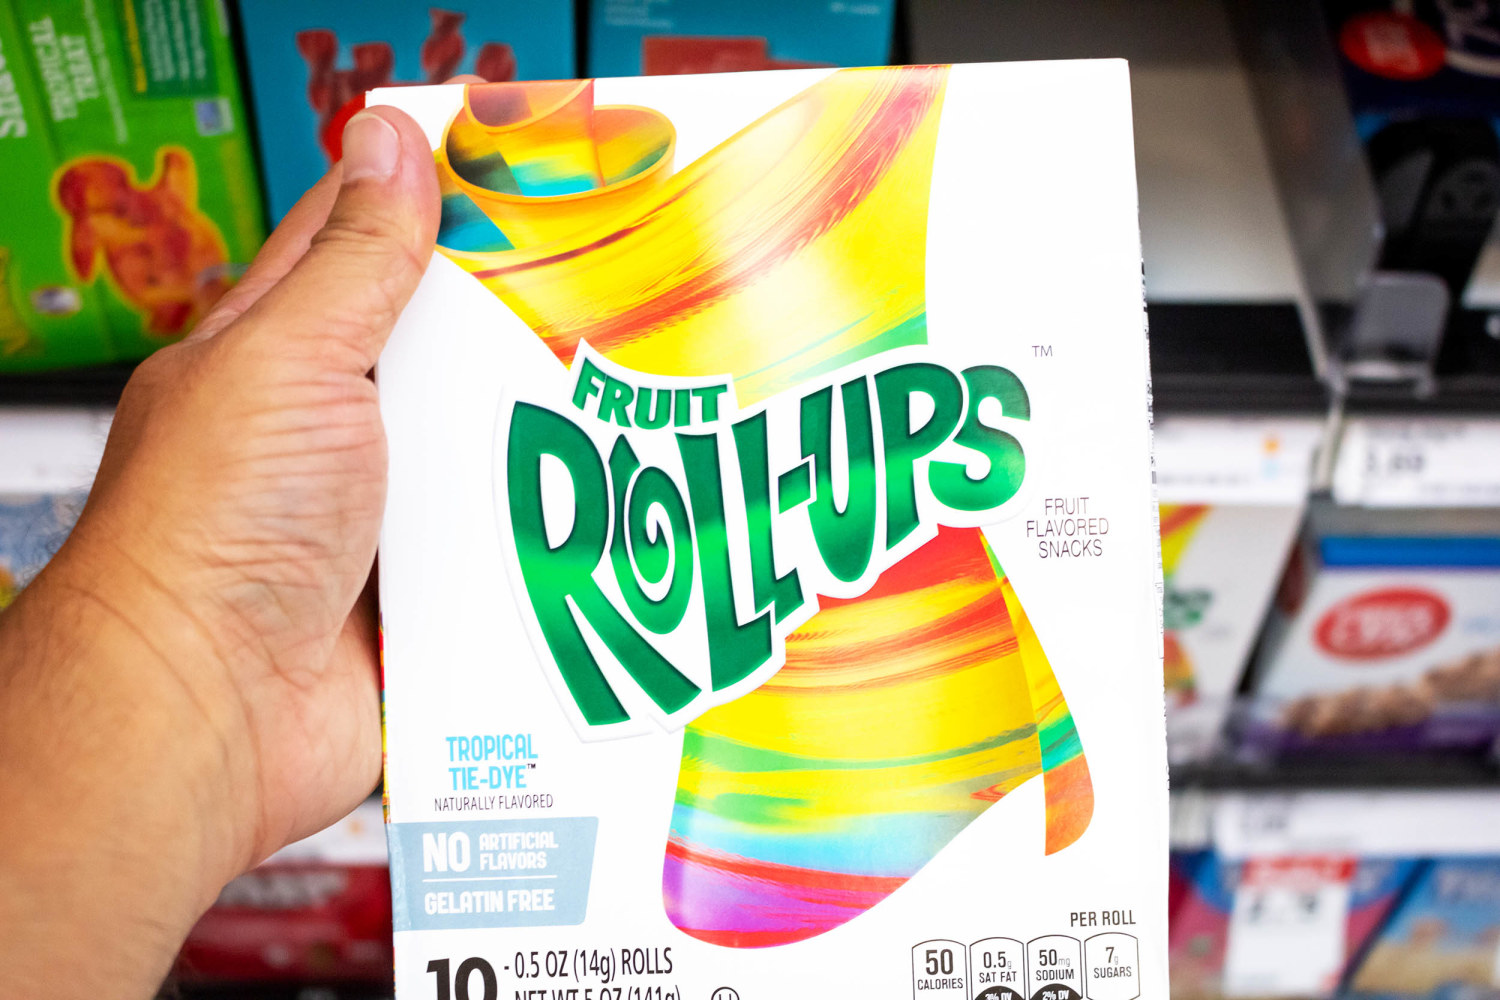 A TikTok Trend is Driving Americans to Smuggle Fruit Roll-Ups